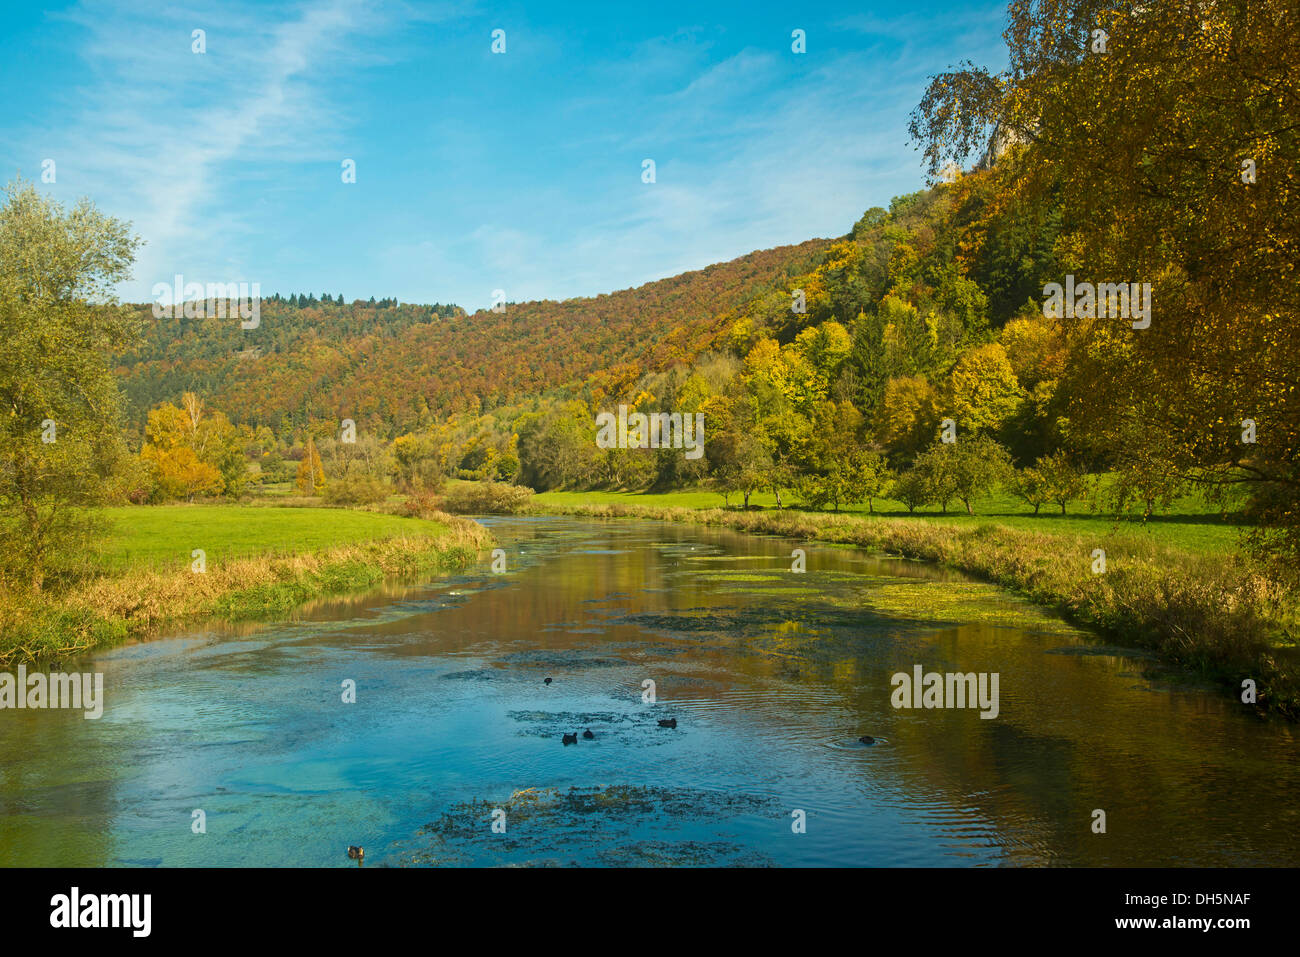 Blautal valley and the Blau river, a 14.5 km long tributary of the Danube river, reaching from Blaubeuren to Ulm Stock Photo